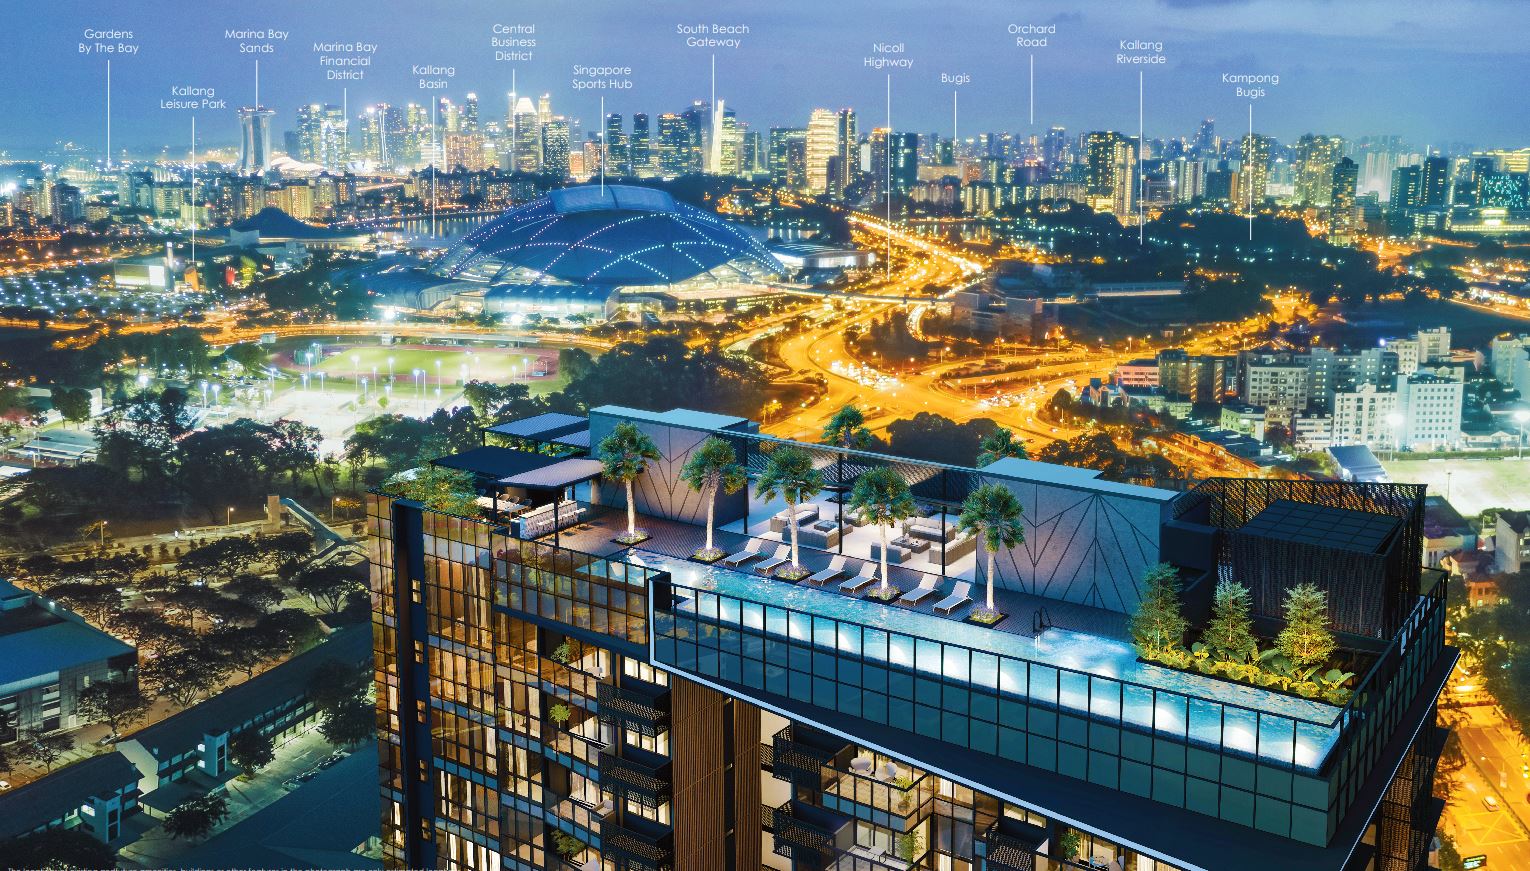 Arena Residences - Geylang New Launch Condo completed next year